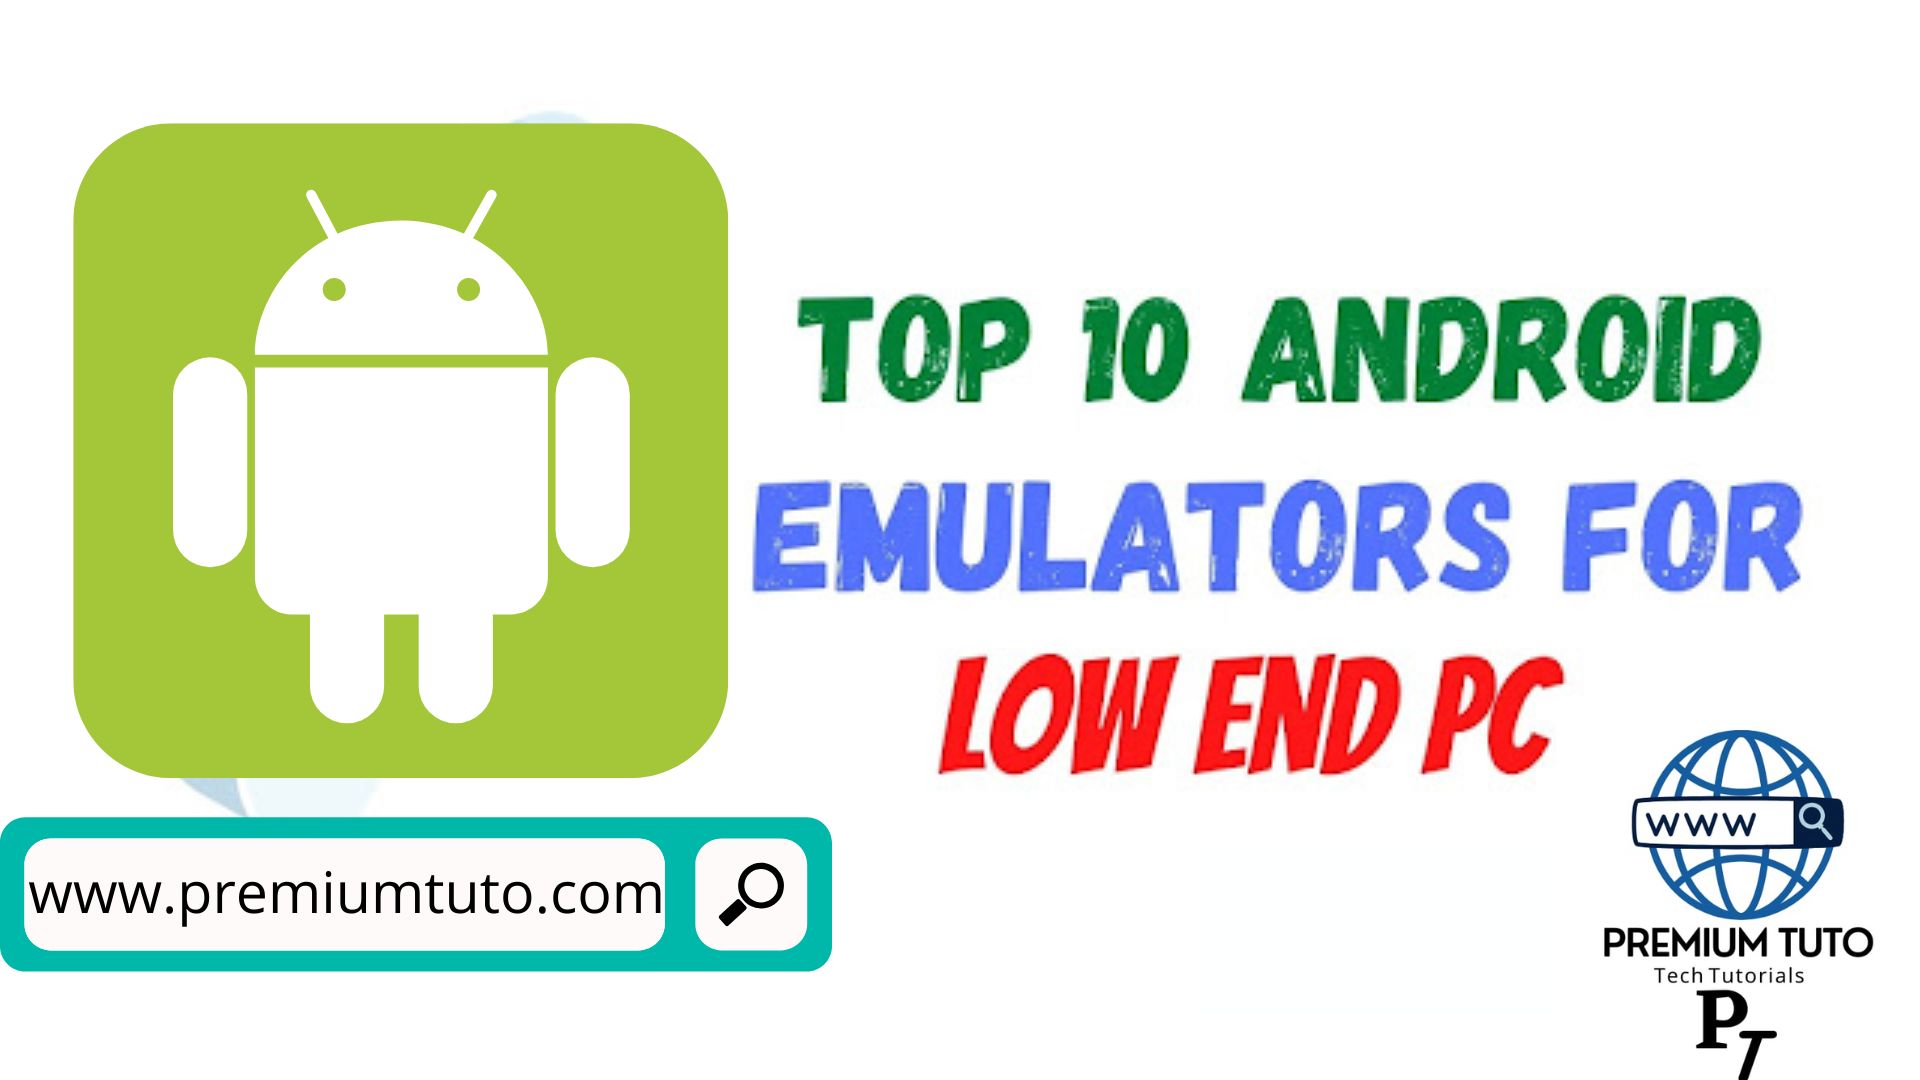 Can I use Android emulator offline on PC? - Quora